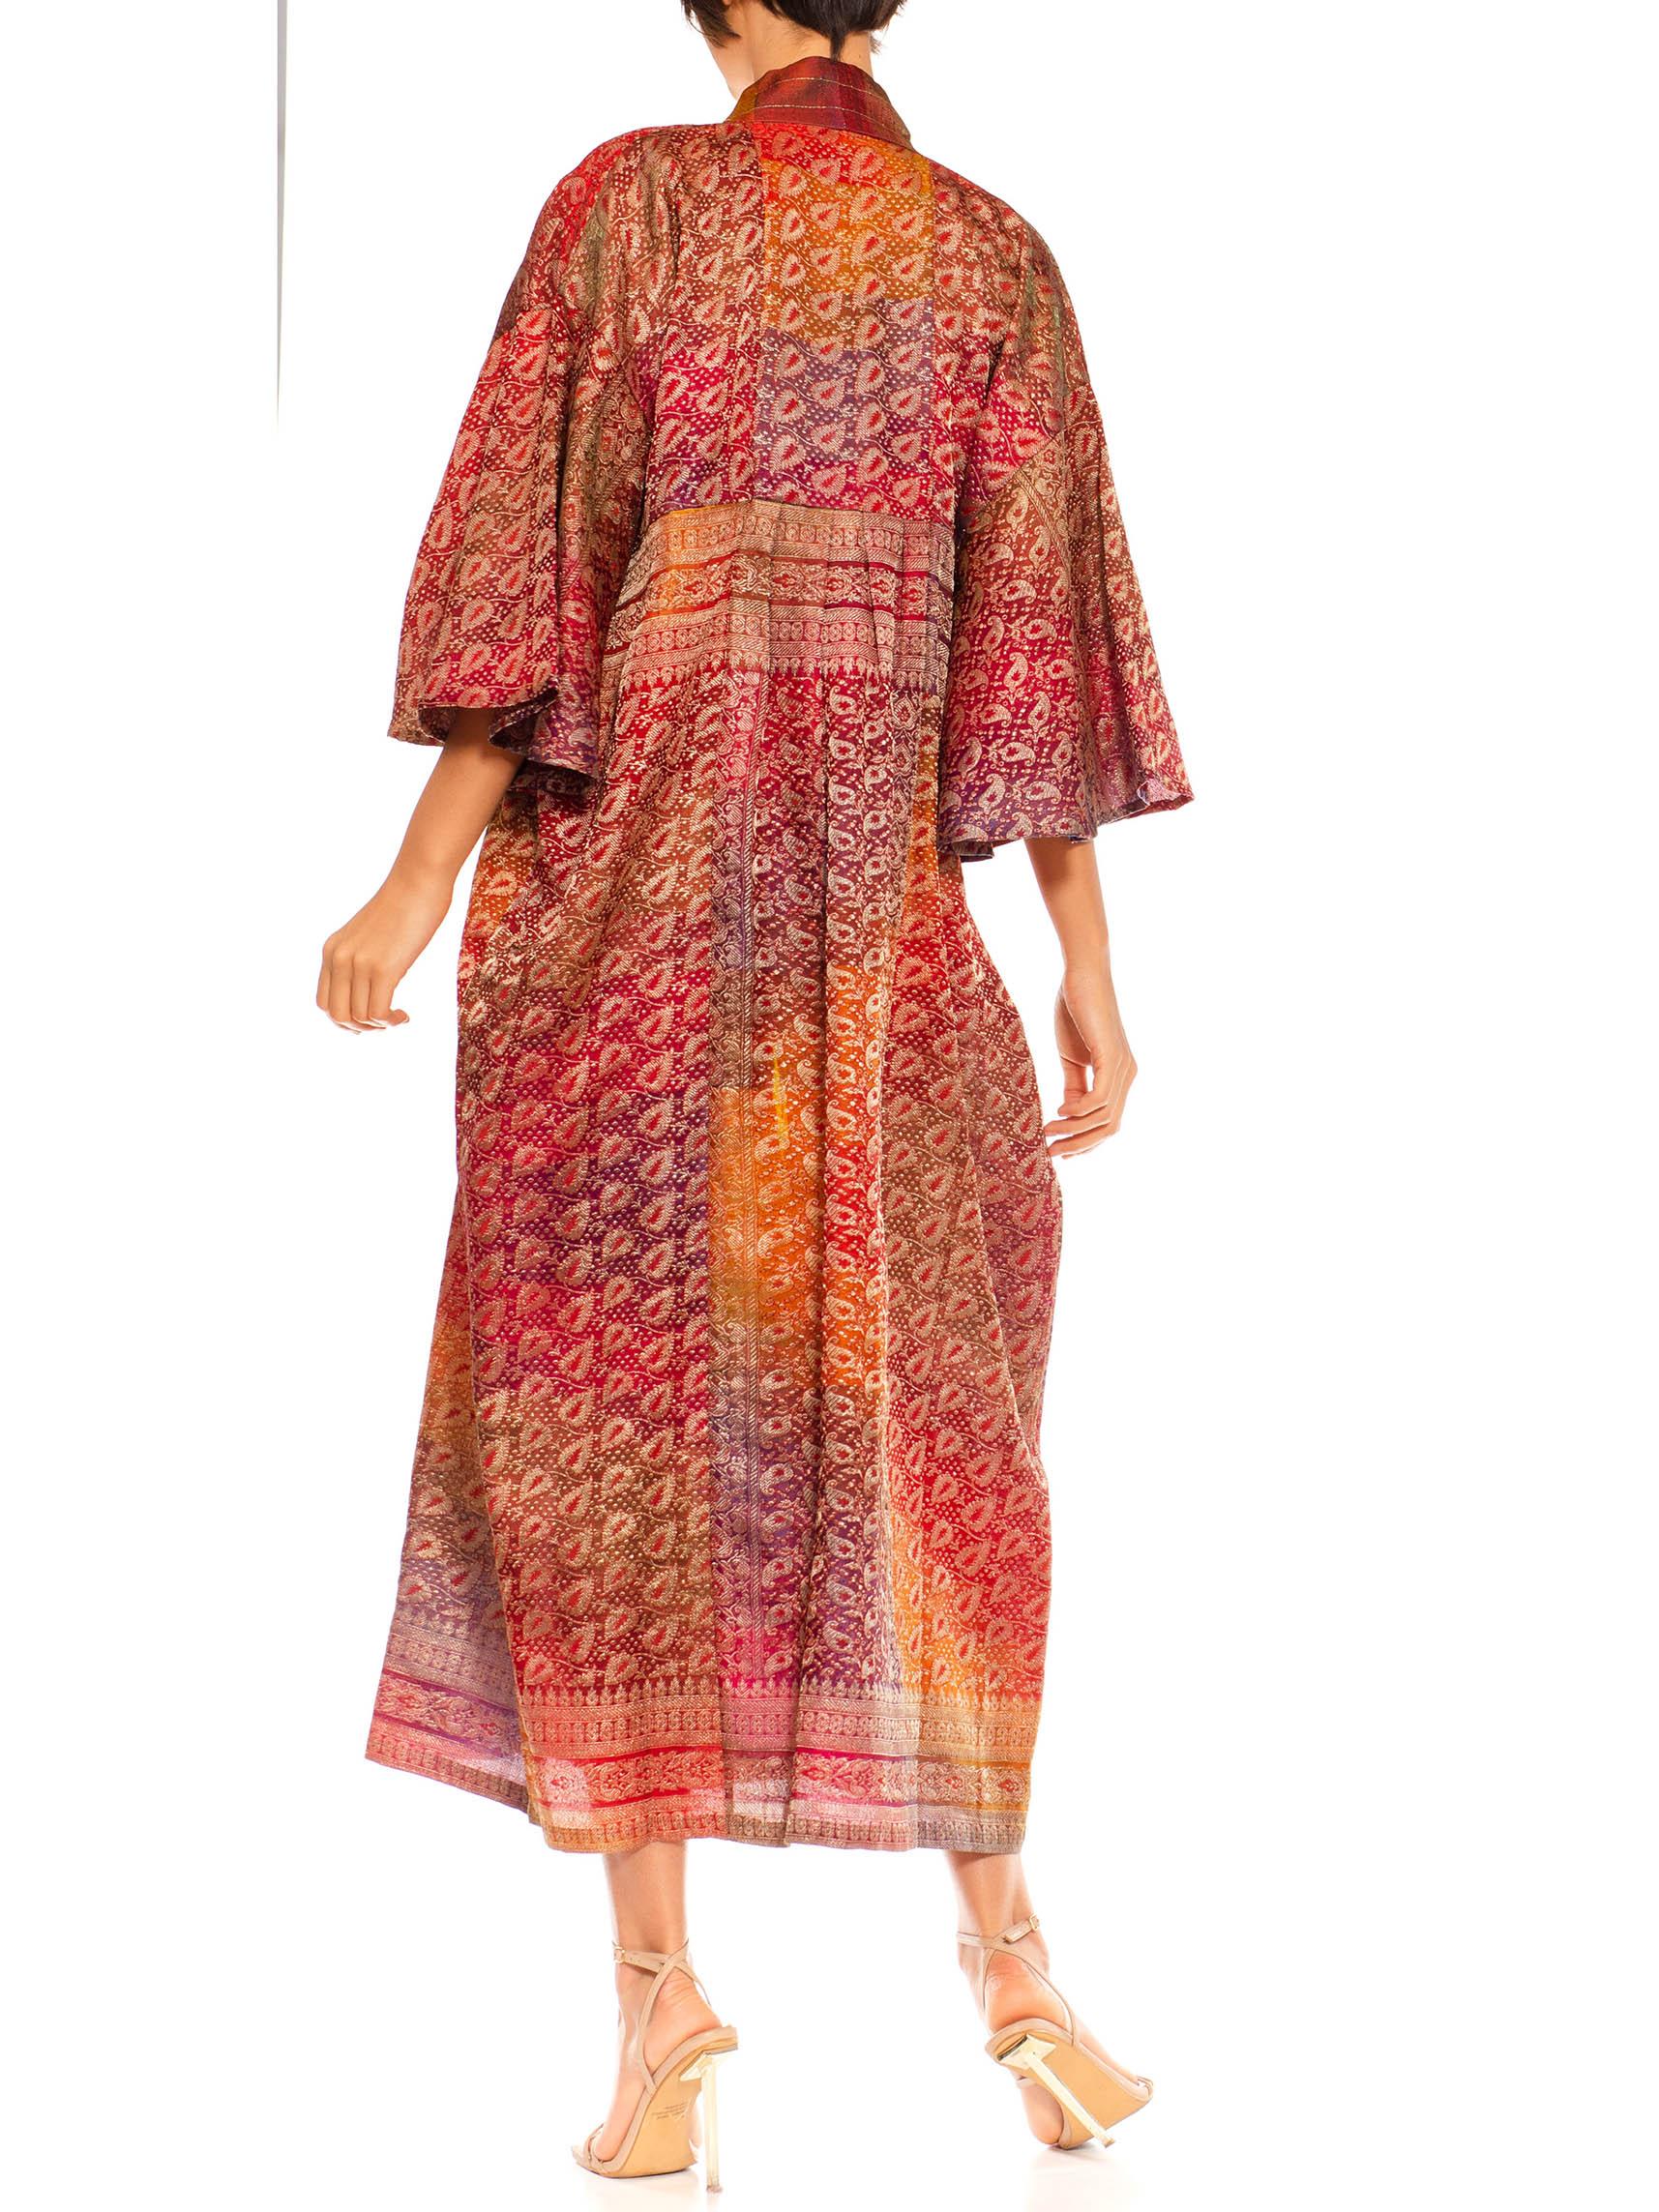 MORPHEW COLLECTION Multicolor Metallic Gold Silk Kaftan With Leaf Print Made Fr For Sale 2